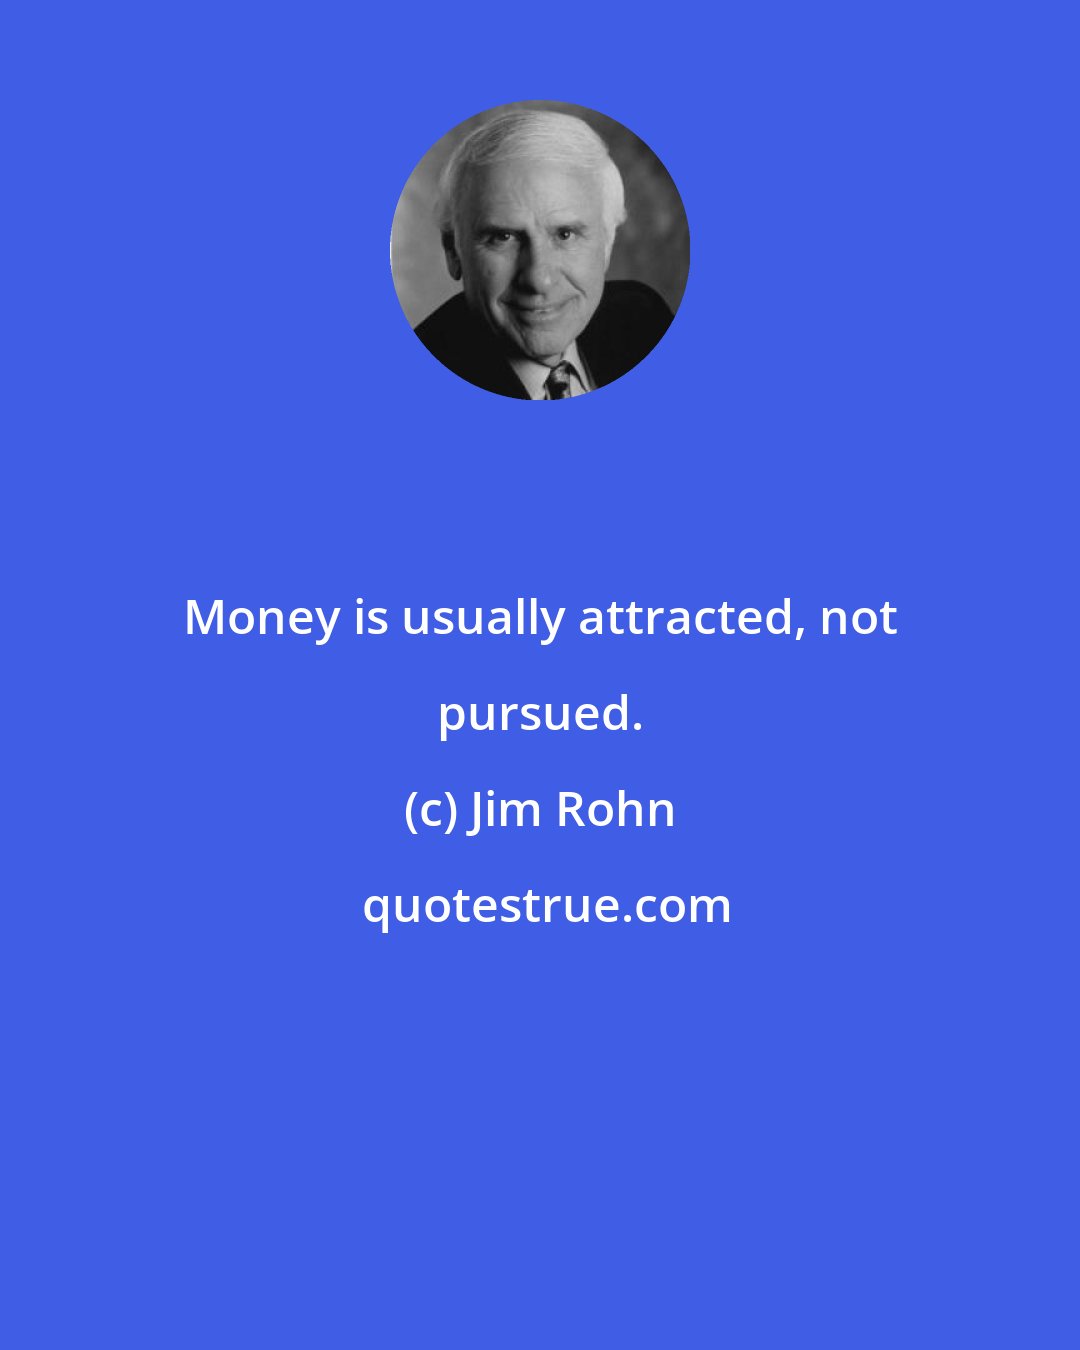 Jim Rohn: Money is usually attracted, not pursued.